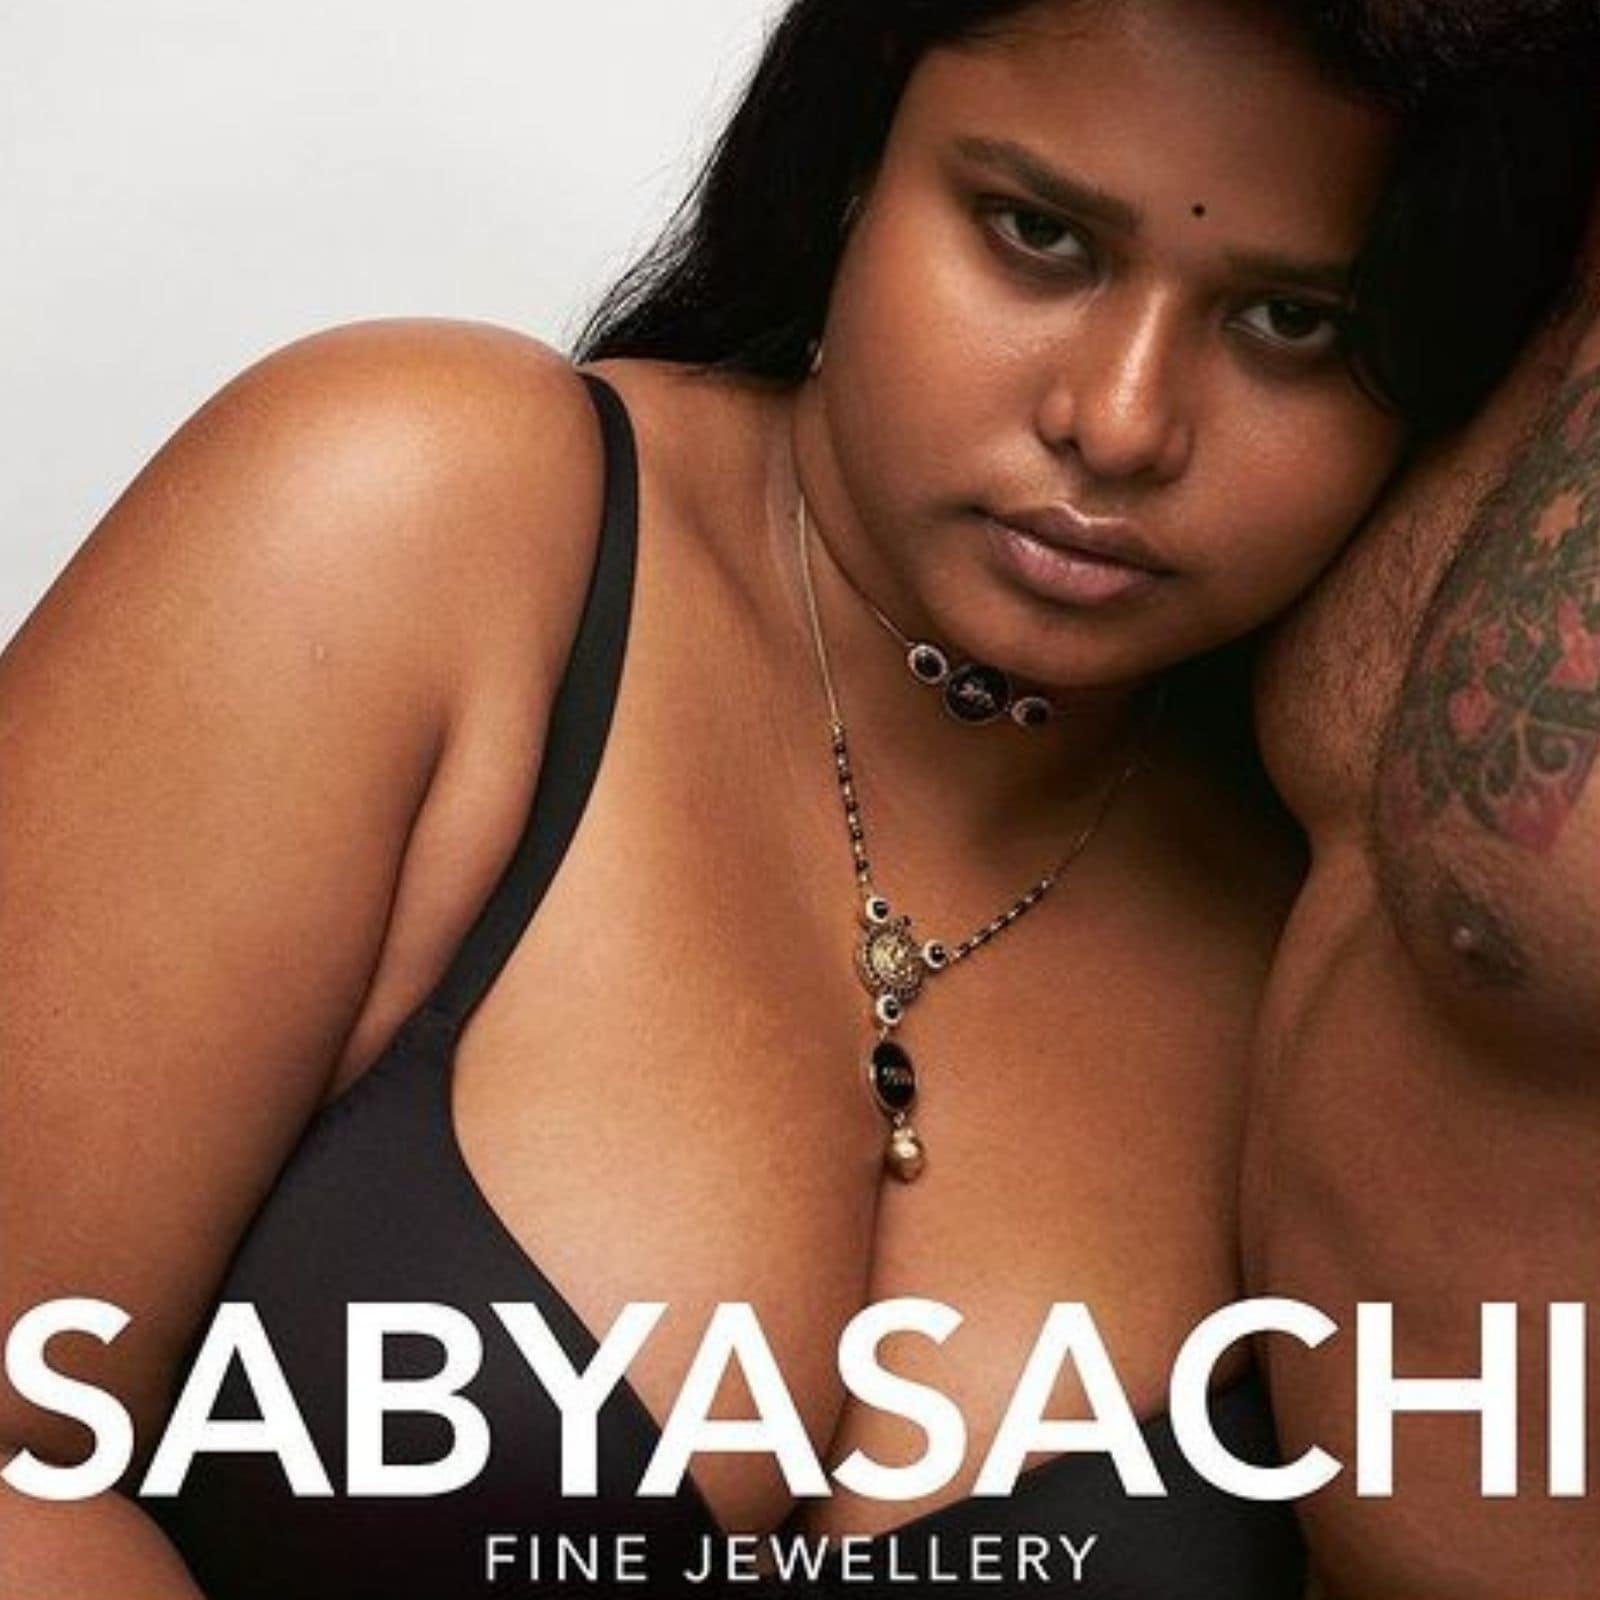 Acter Meena Nud Photoes - Sabyasachi's New Campaign Faces Flak For Featuring Mangalsutra as 'Fashion  Jewellery'